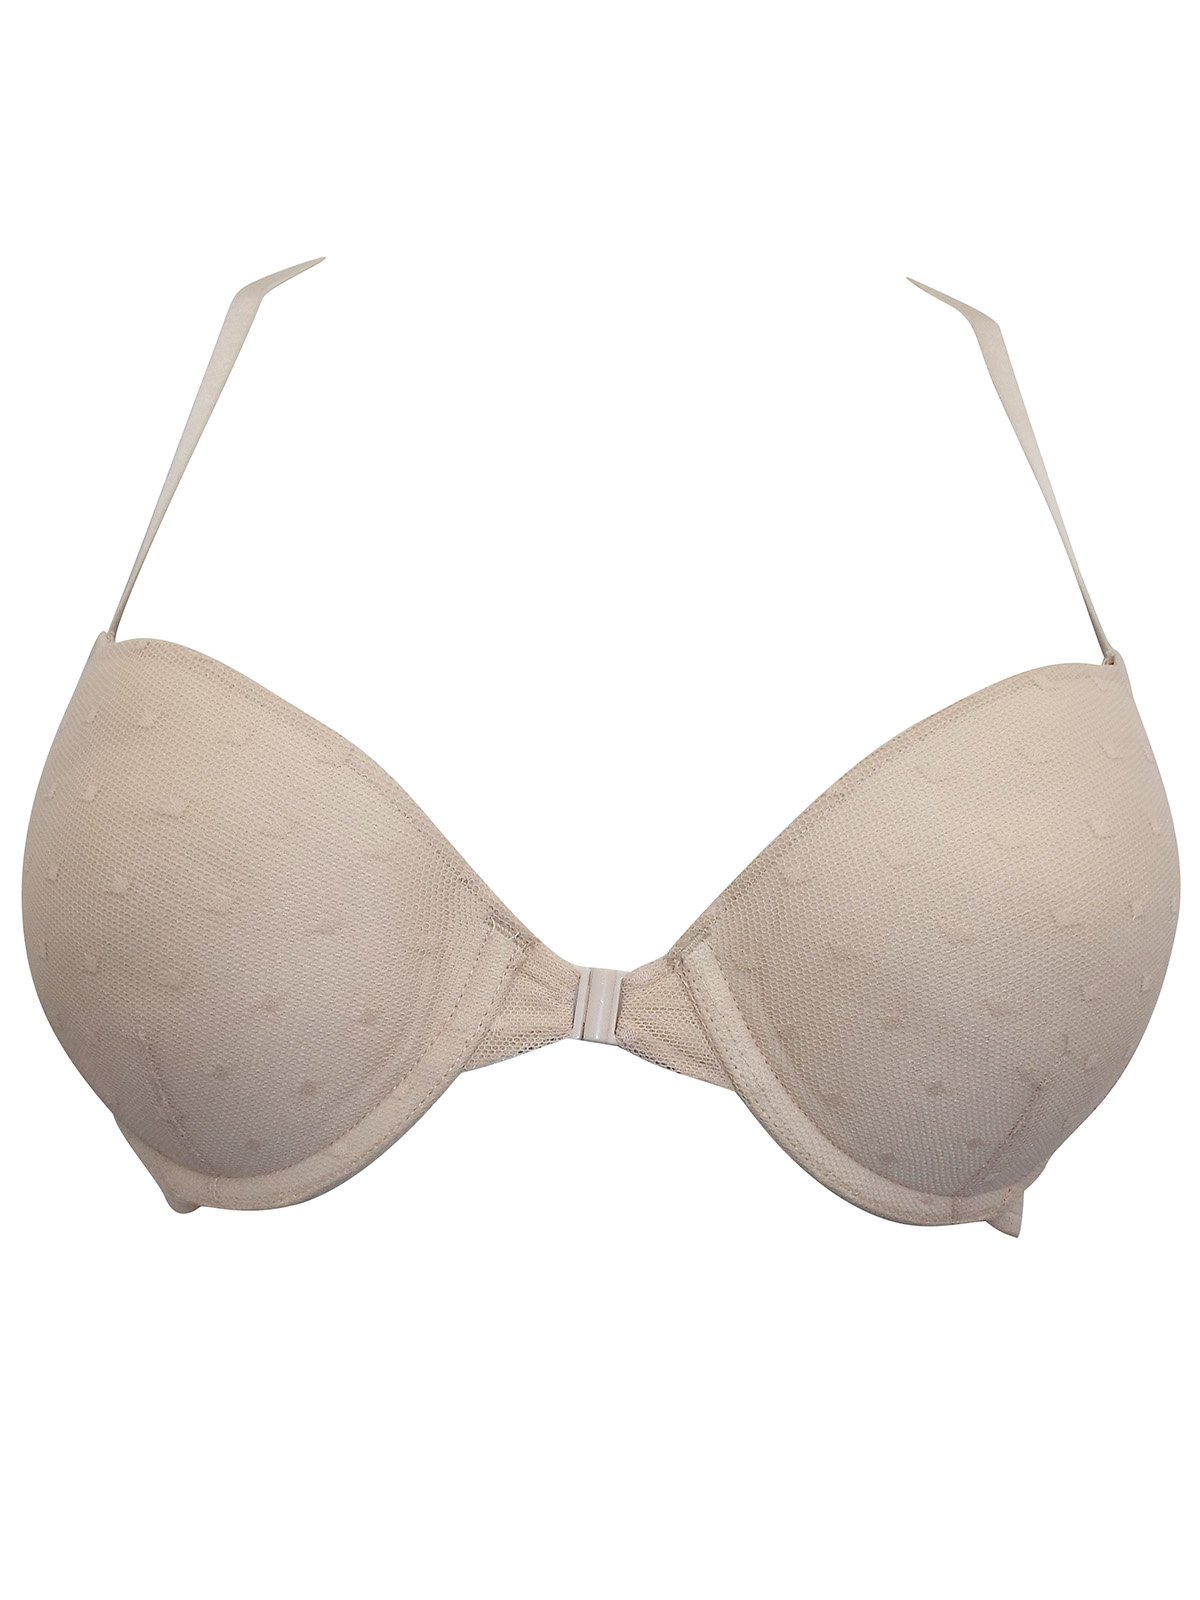 Smart & Sexy - - Smart & Sexy NUDE Spotted Front Fastening T-Shirt Bra -  Size 34 to 38 (A-B-C)